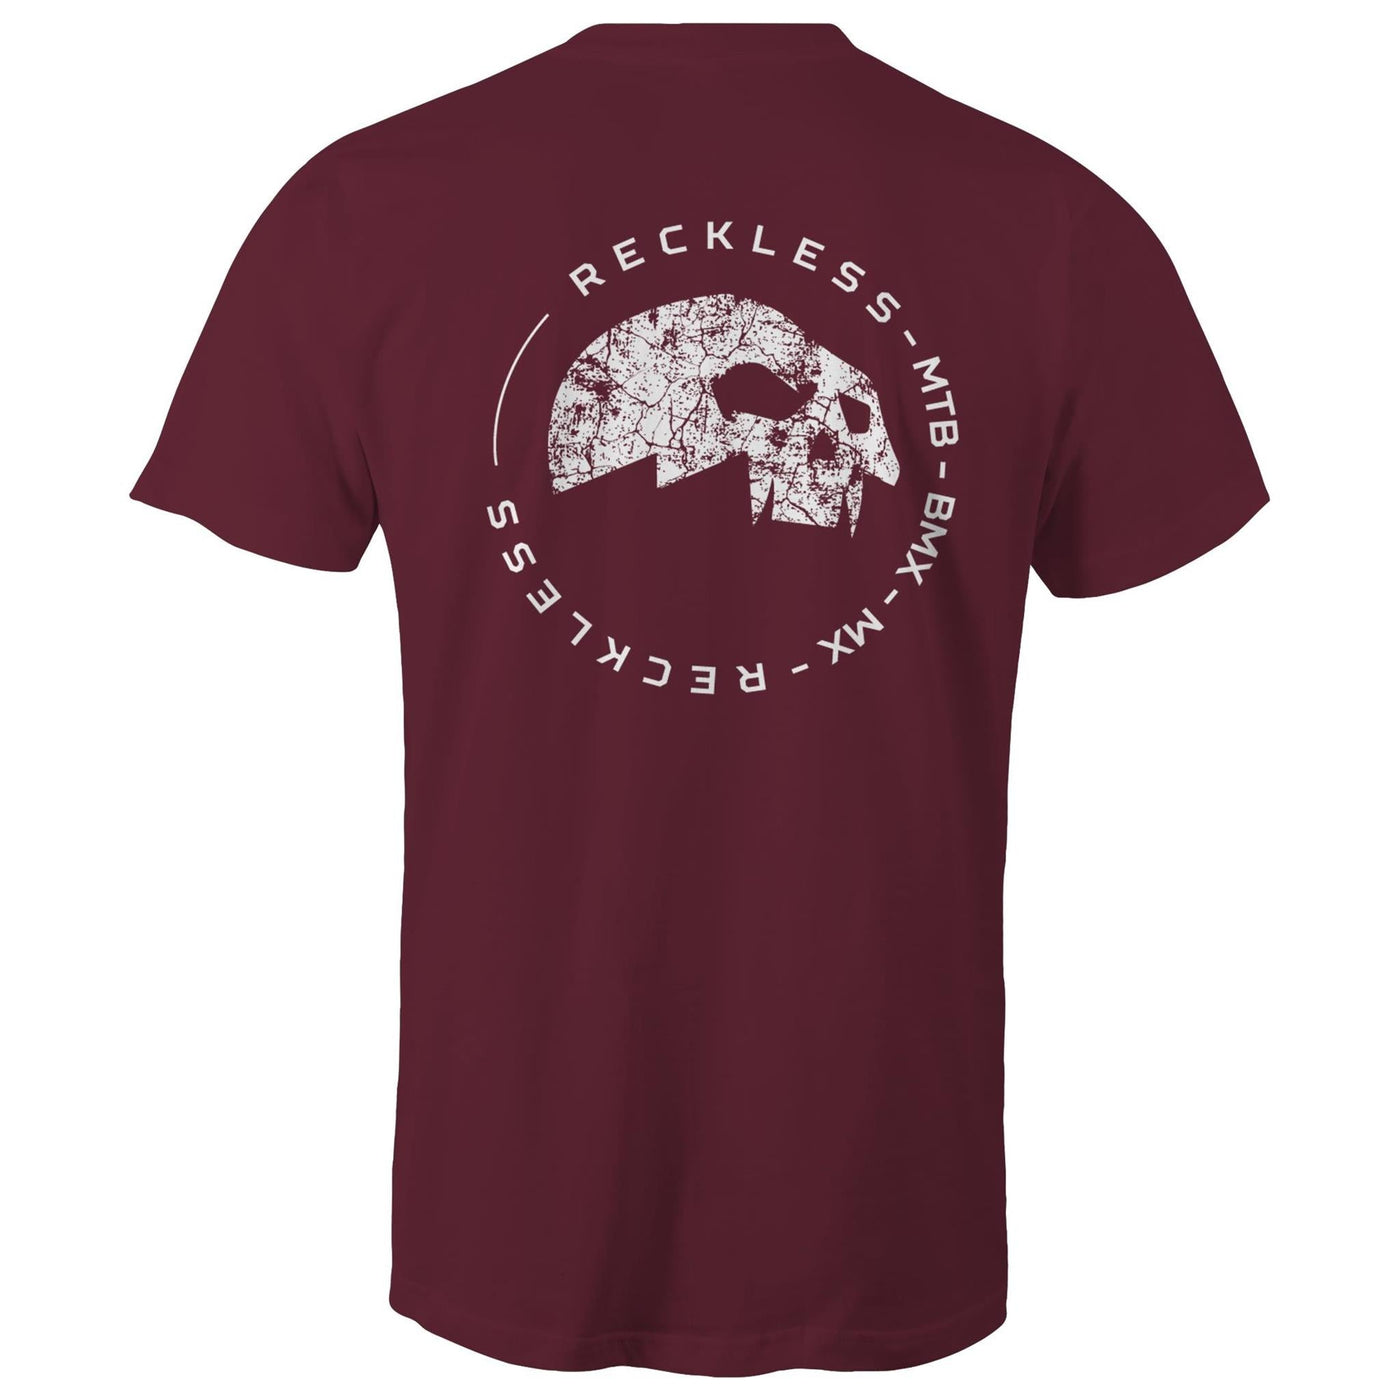 Reckless Skull T - Reckless Store